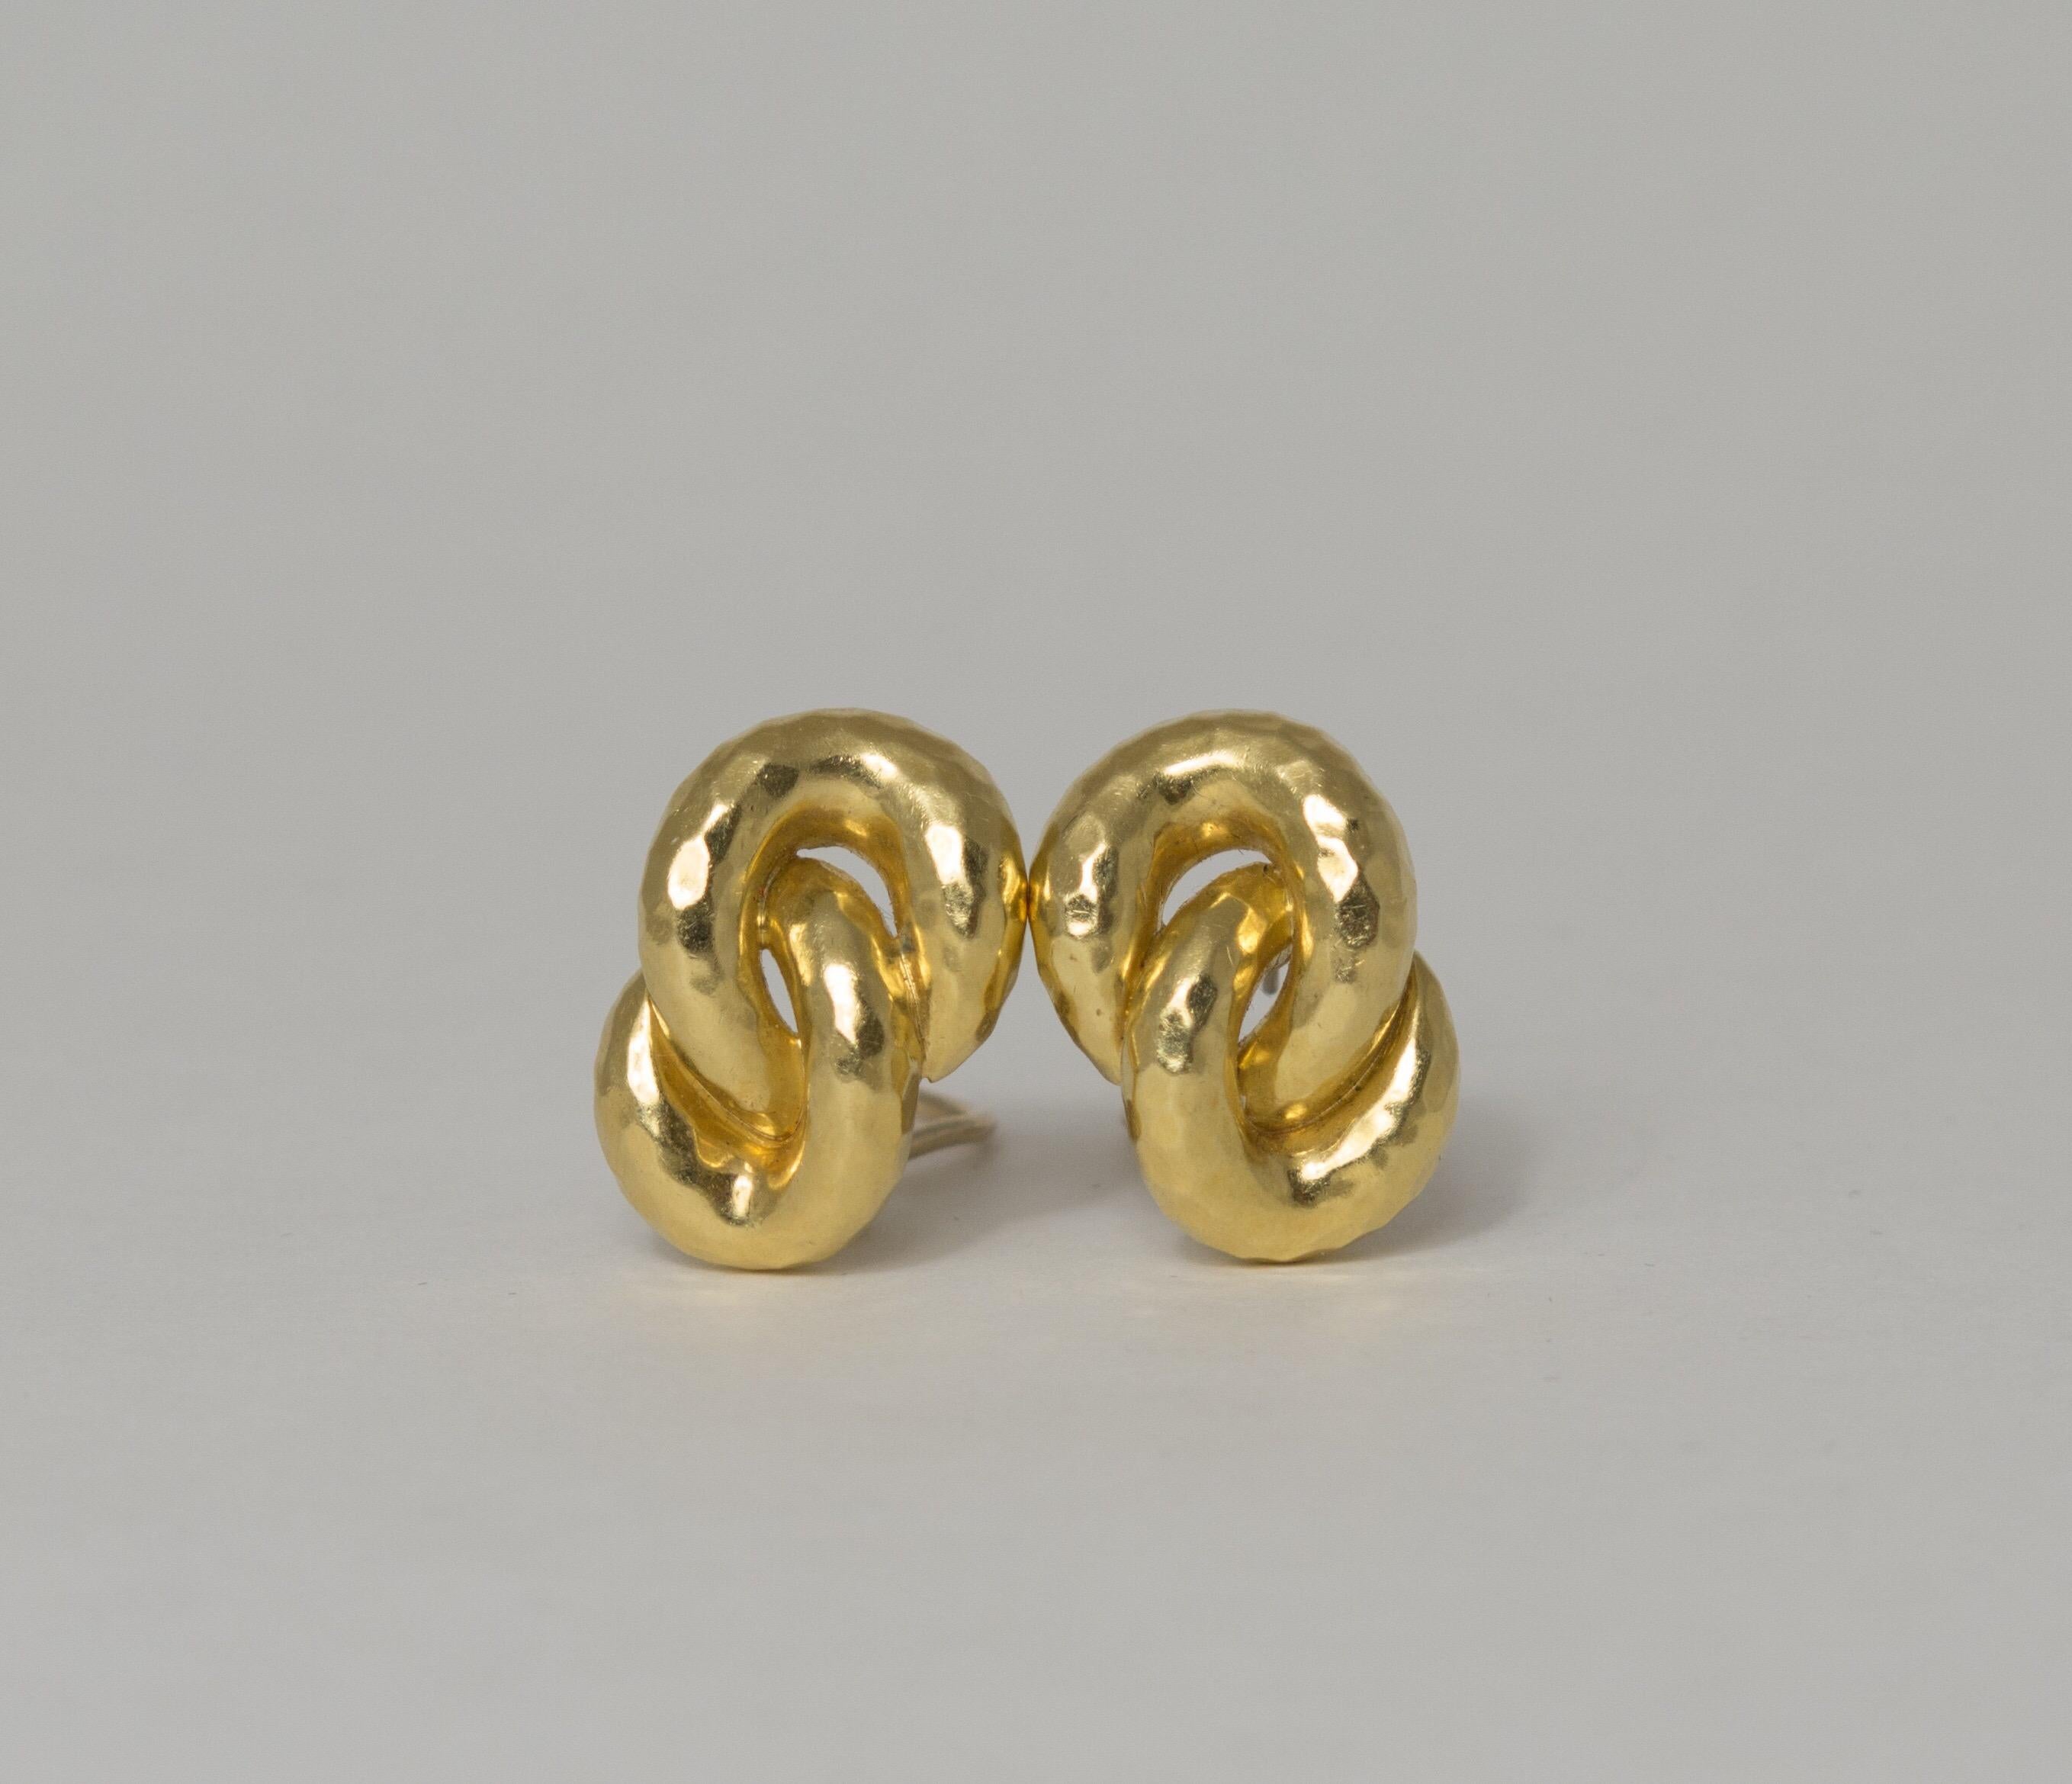 A pair of post ear clip hand hammered 18K yellow gold by Henry Dunay in classic knot motif. 
18K yellow gold, stamped: Dunay / 750 / 12596
7/8